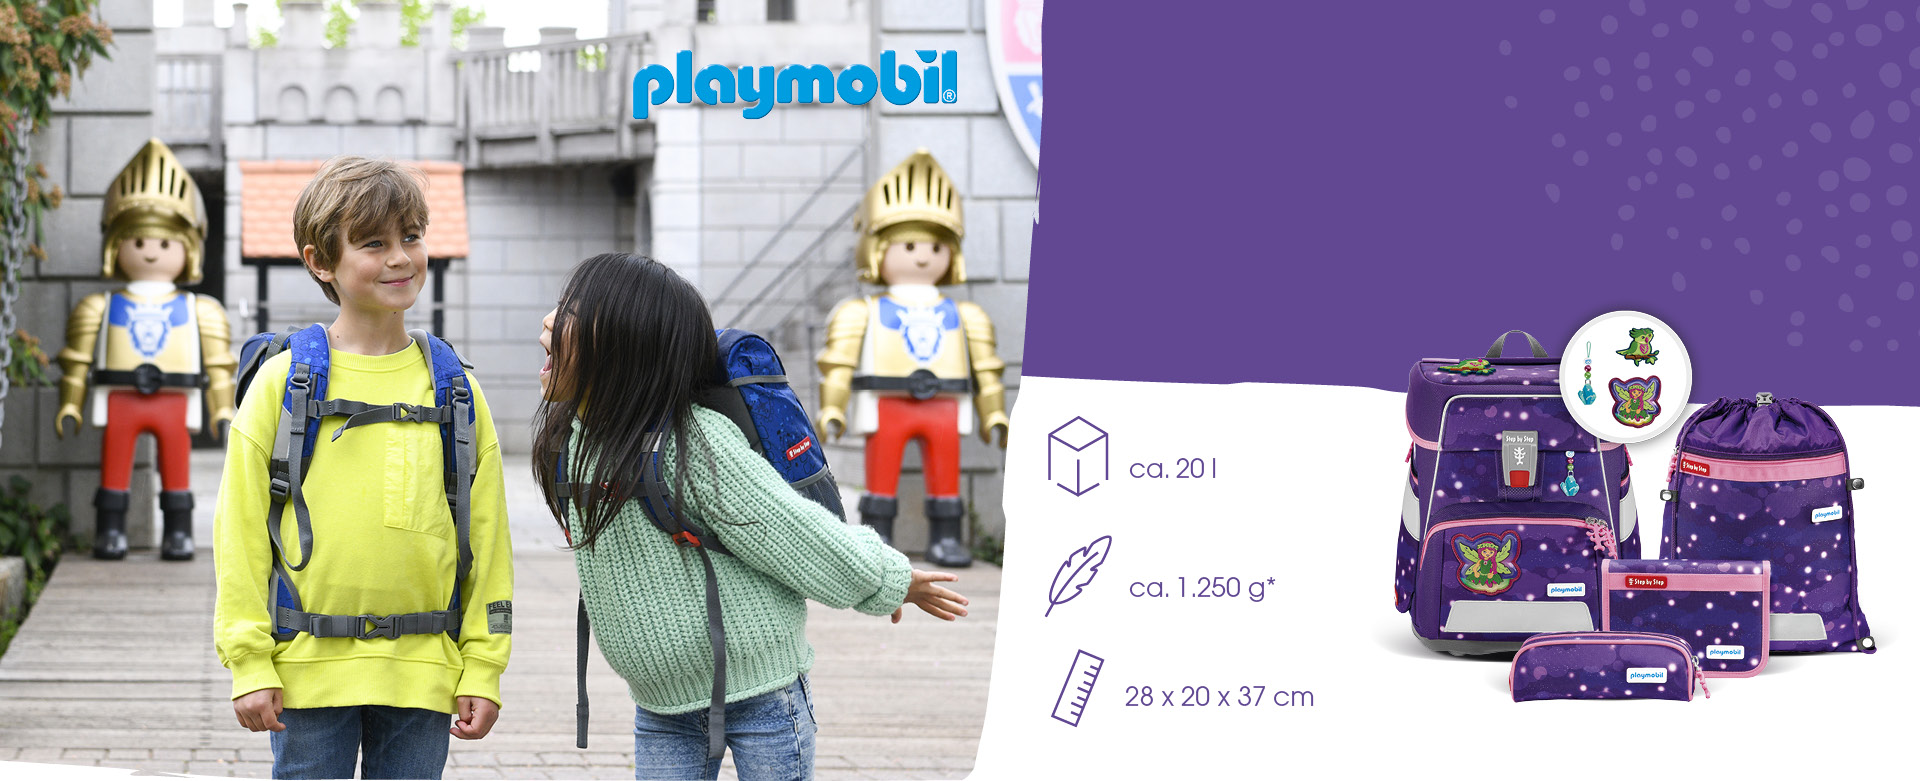 Limited Edition SPACE PLAYMOBIL